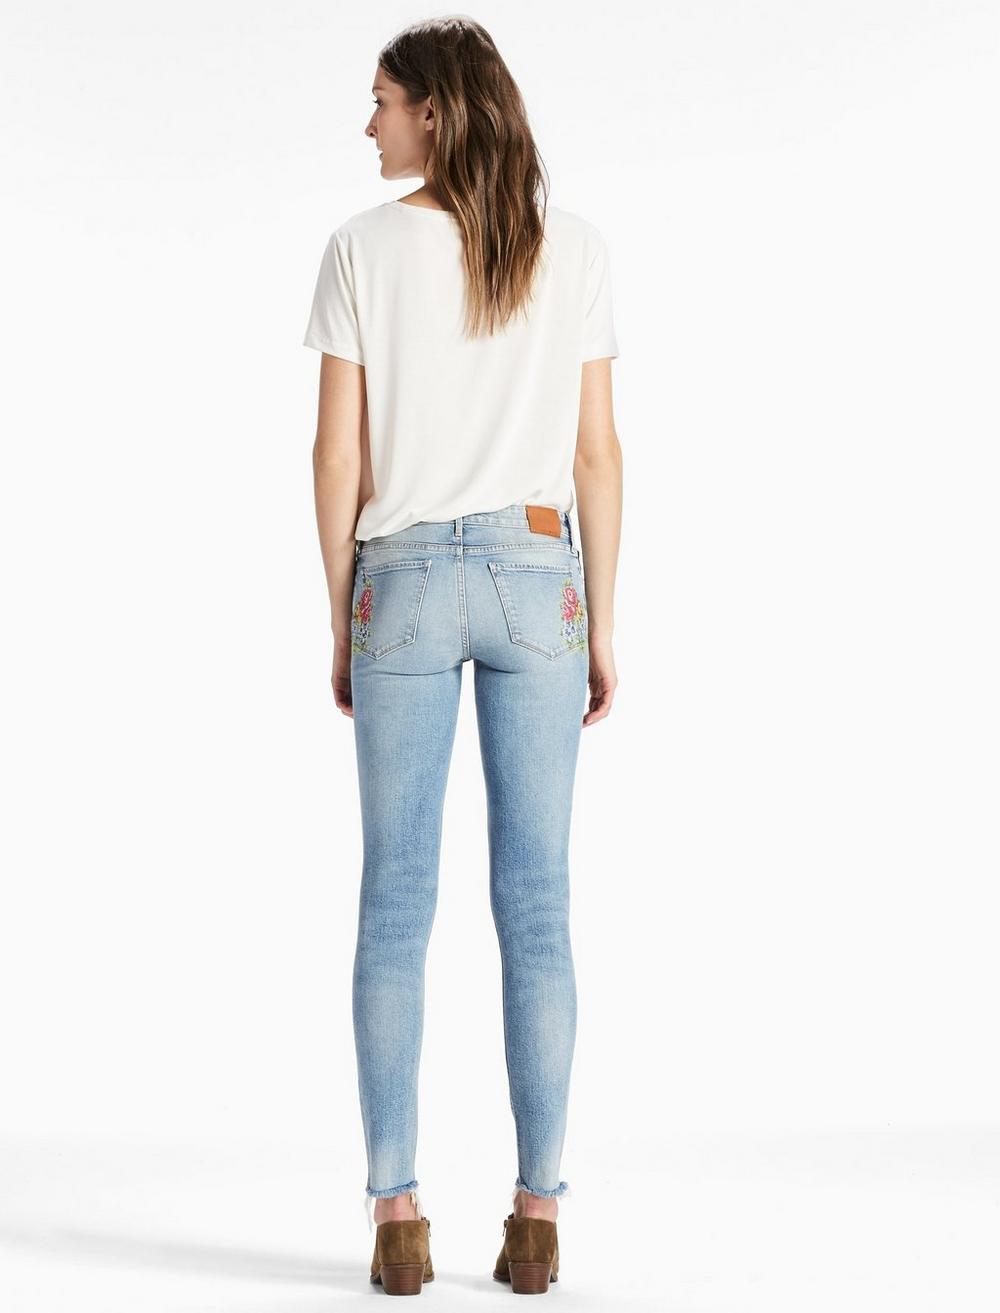 AVA MID RISE SKINNY JEAN WITH EMBROIDERY | Lucky Brand